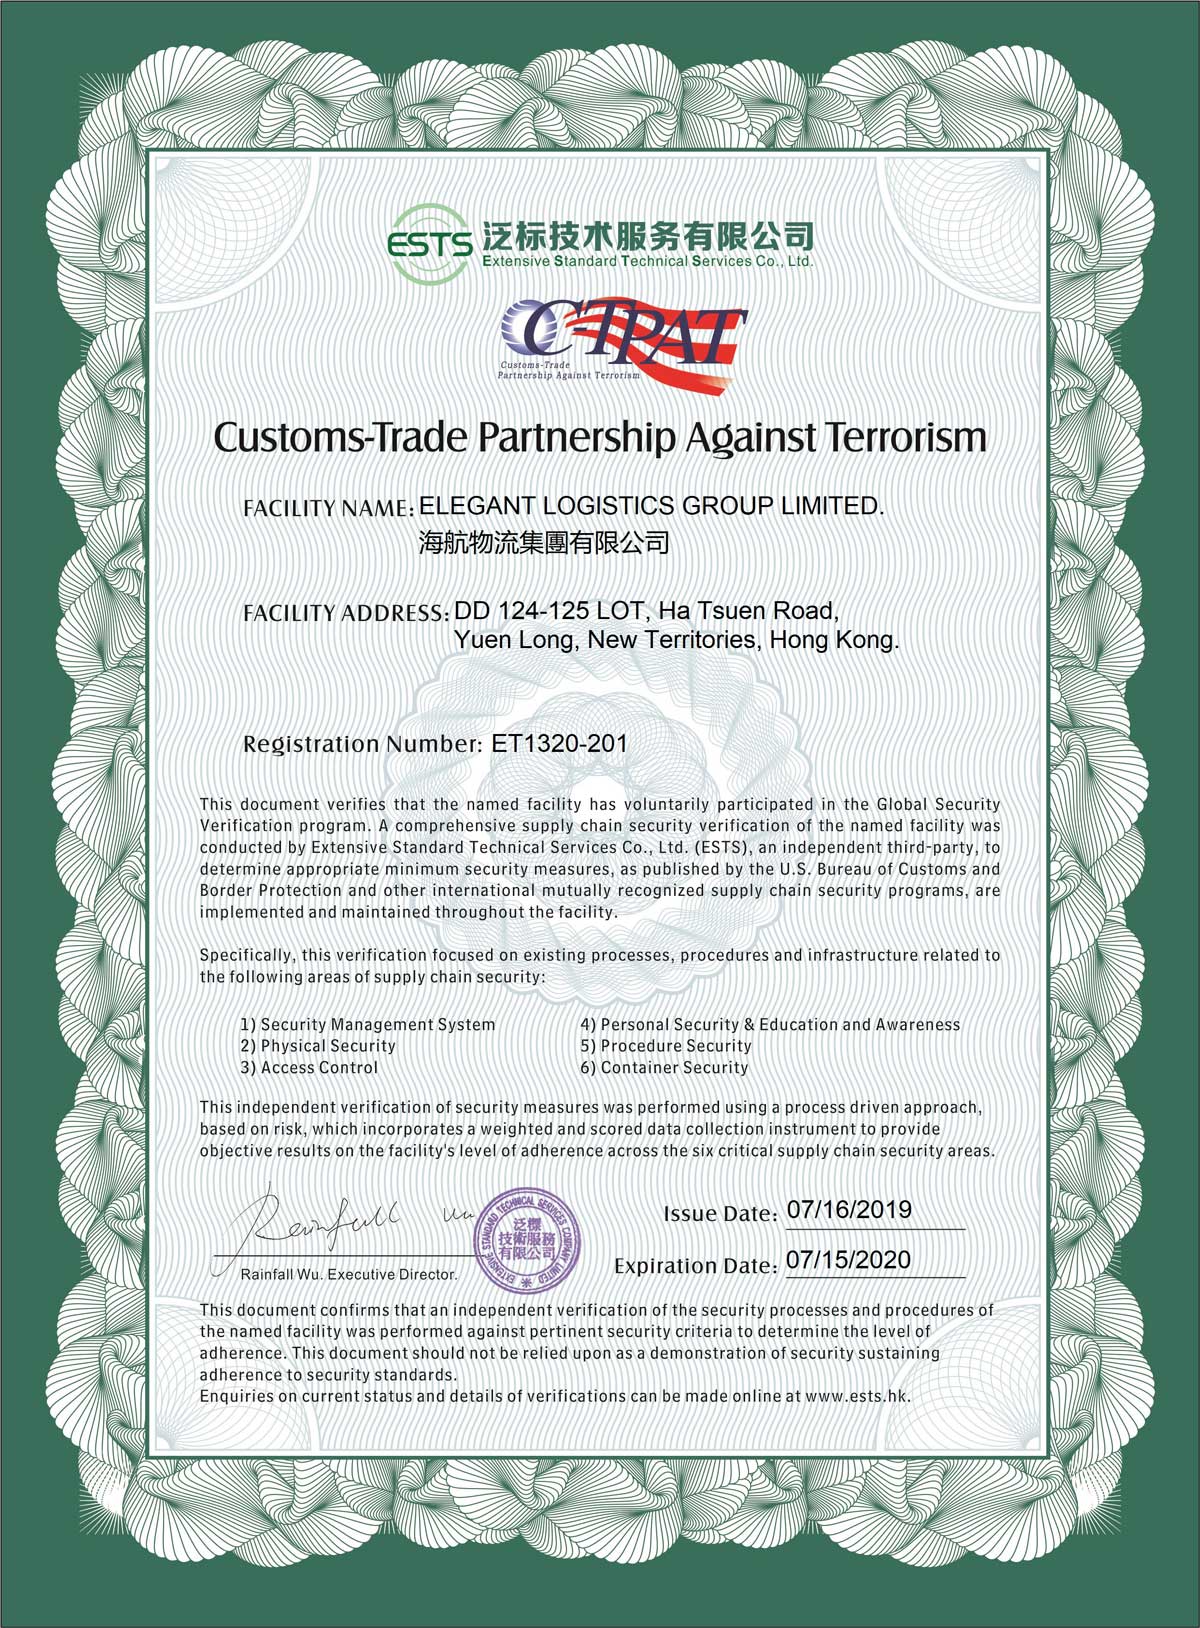 In July 2019, we were awarded membership of the U.S. Customs Trade and Anti-Terrorism Alliance (C-TPAT) for freight companies.